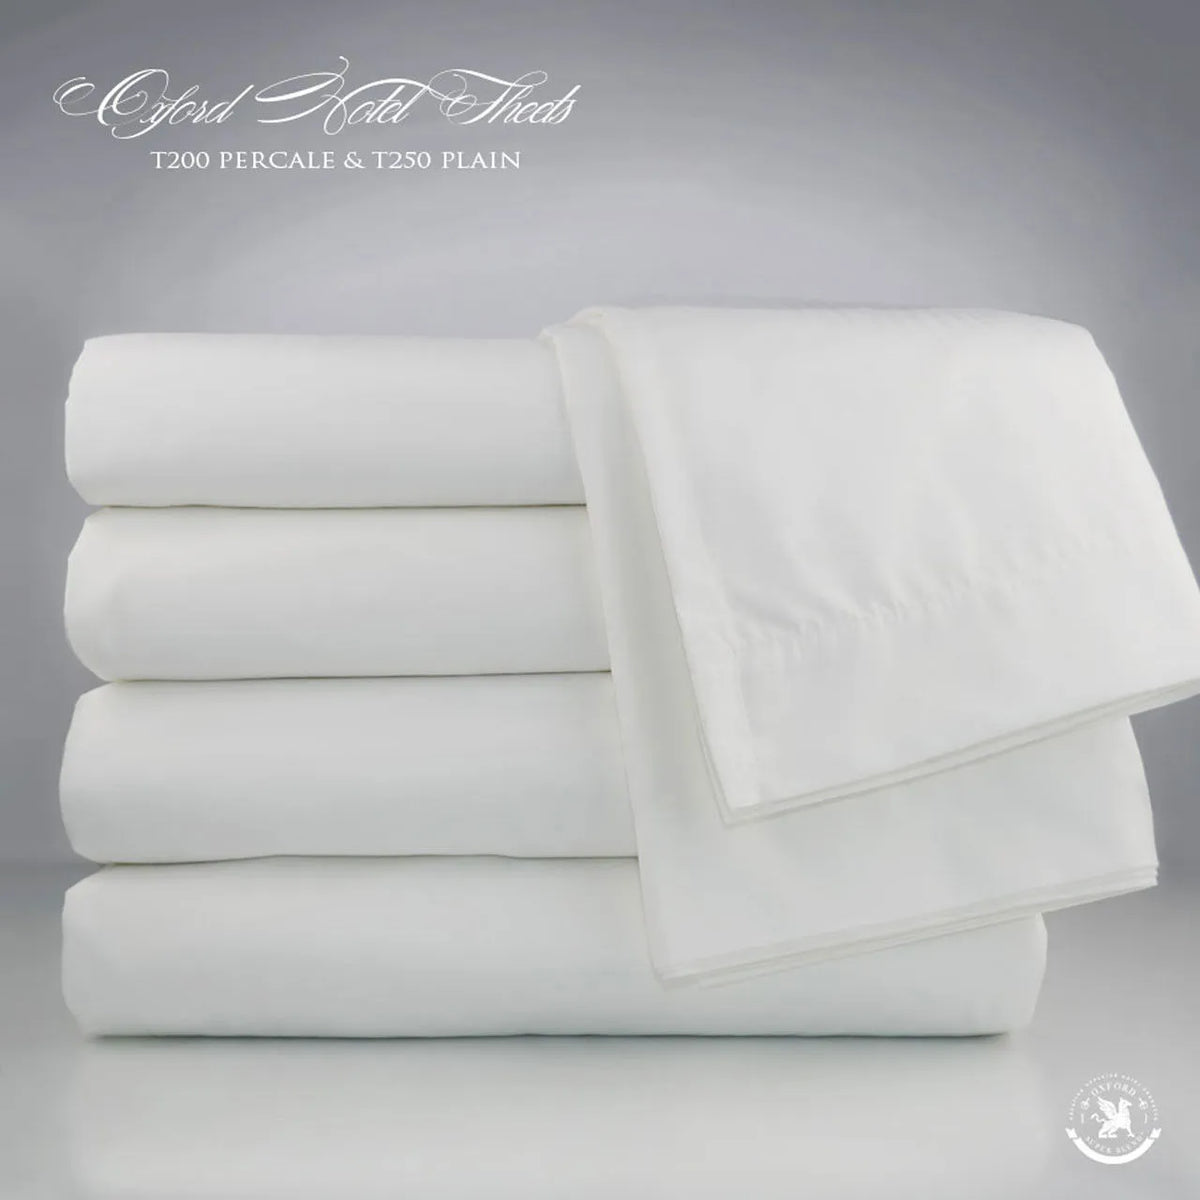 Flat Sheets - Oxford T250 Satin Bed Linen